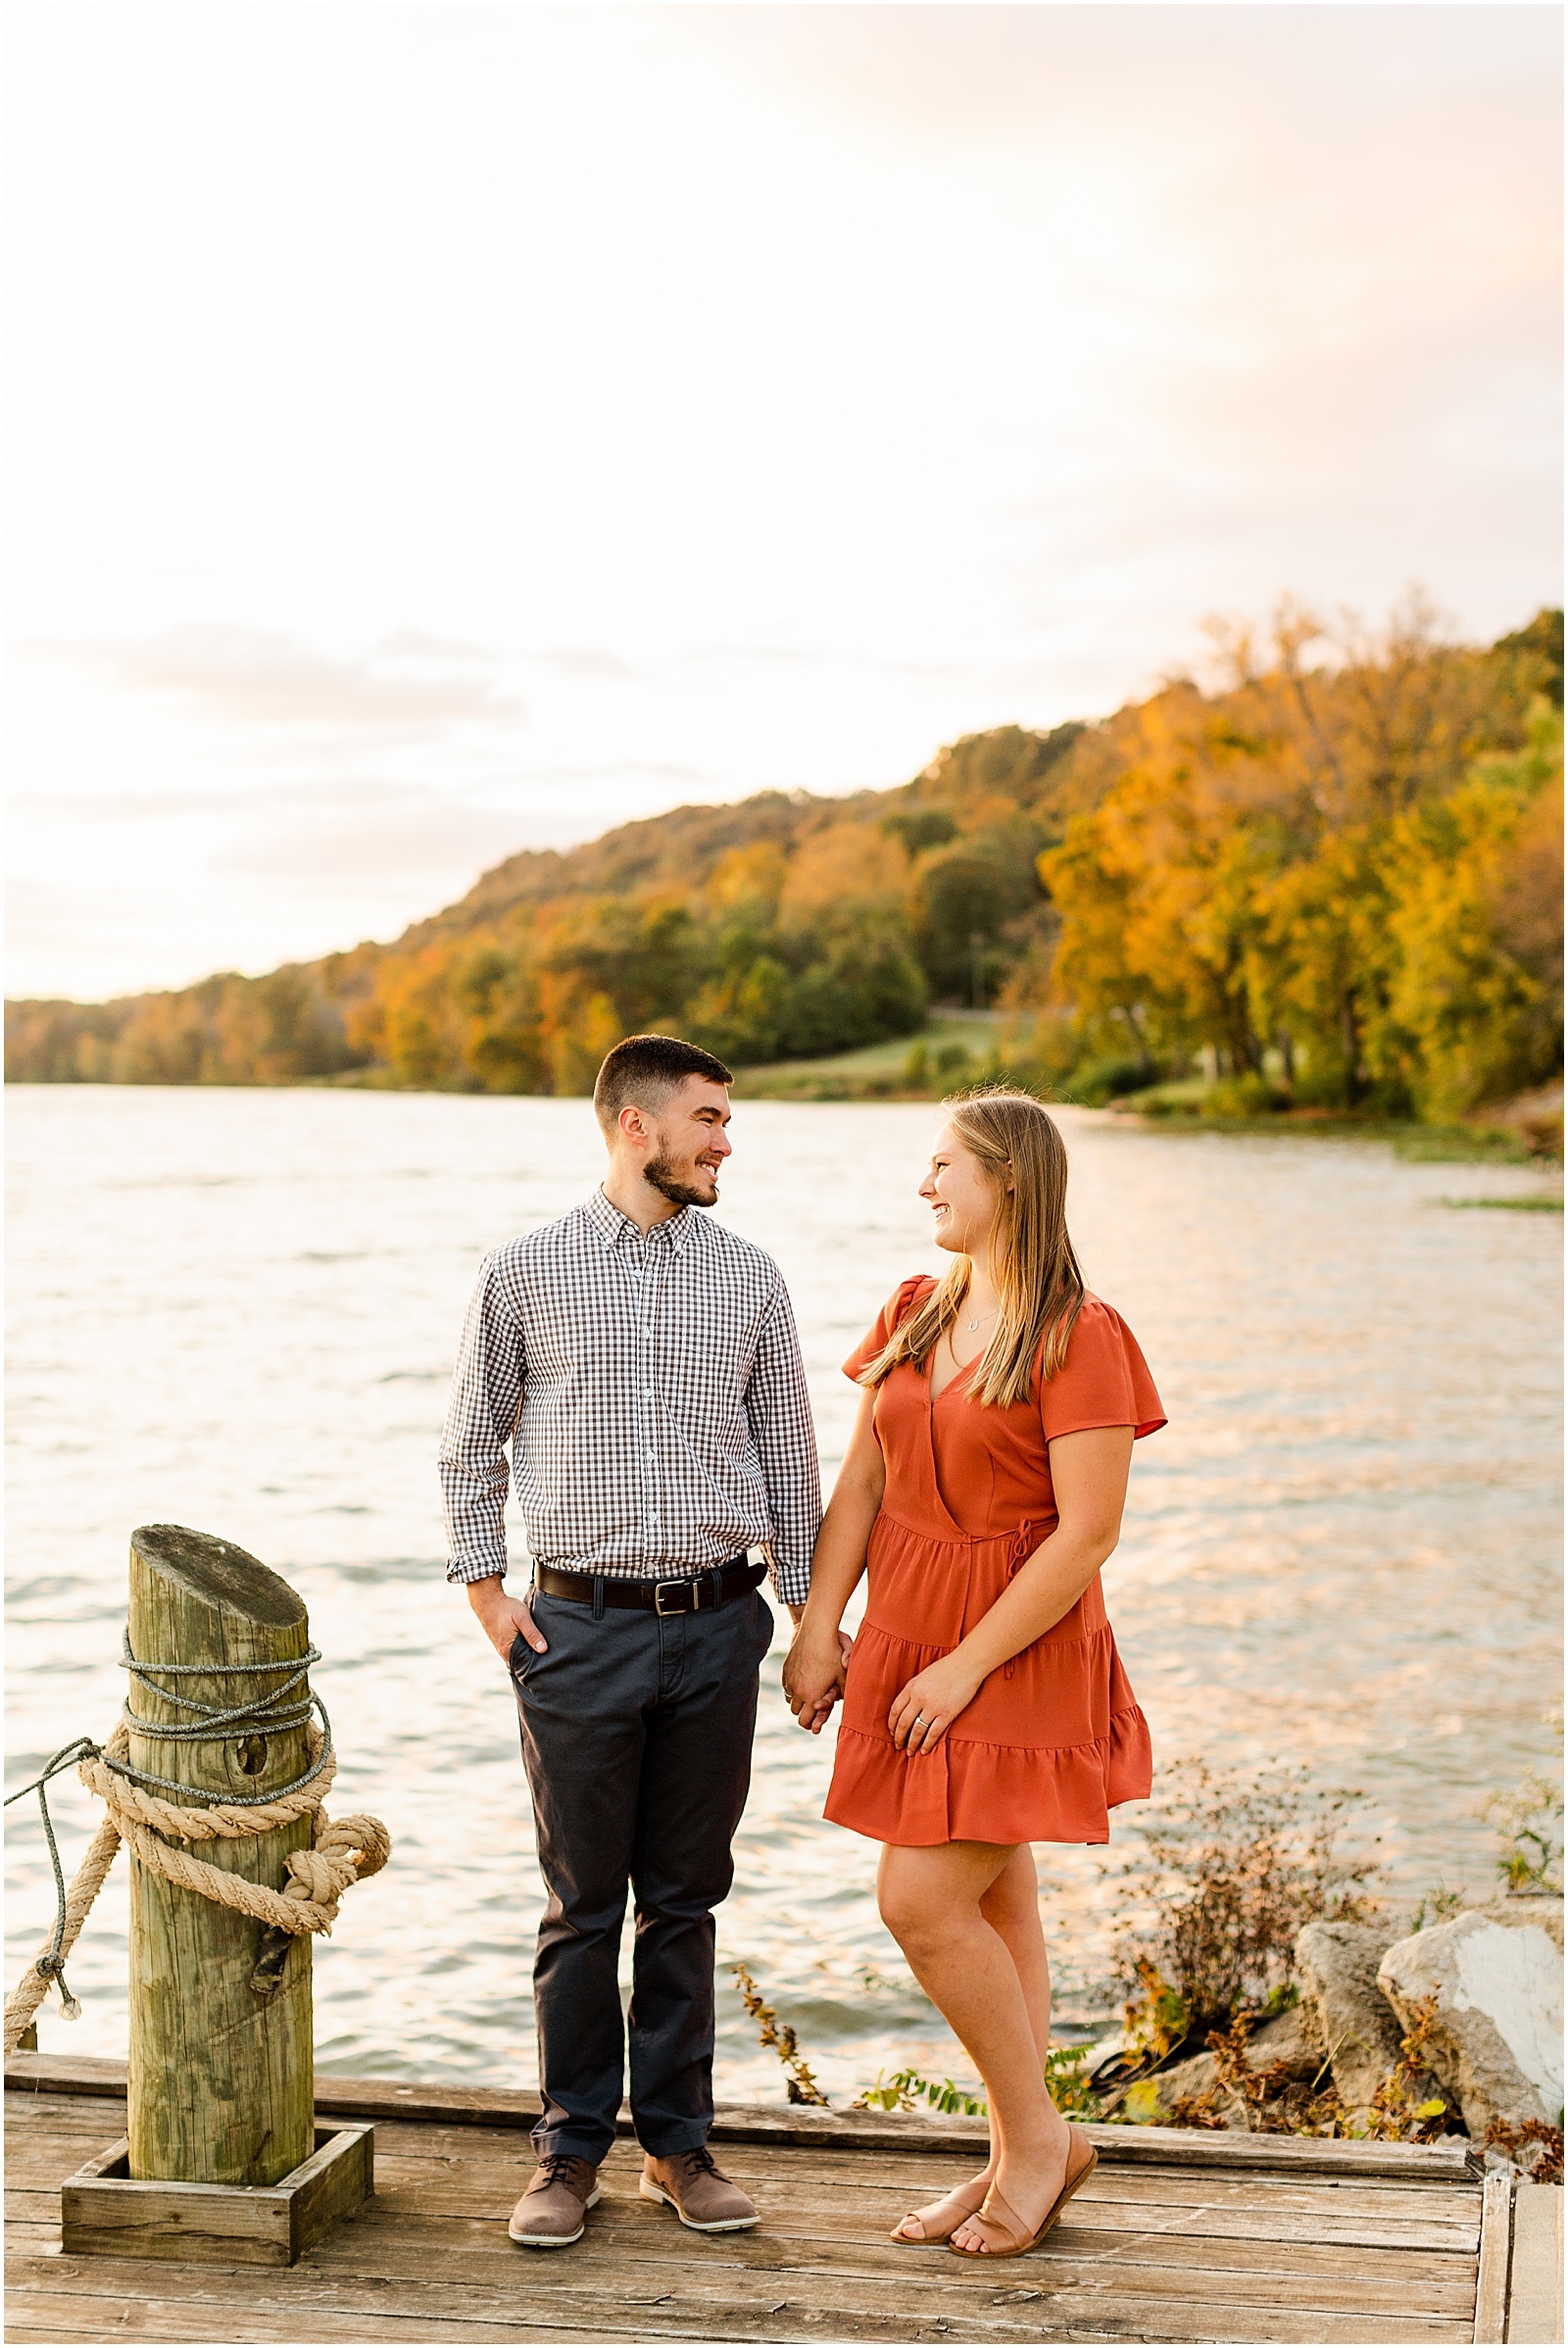 Claire and Kane's Riverside Engagement Session Bret and Brandie Photography | Evansville Indiana Wedding Photographers_0034.jpg